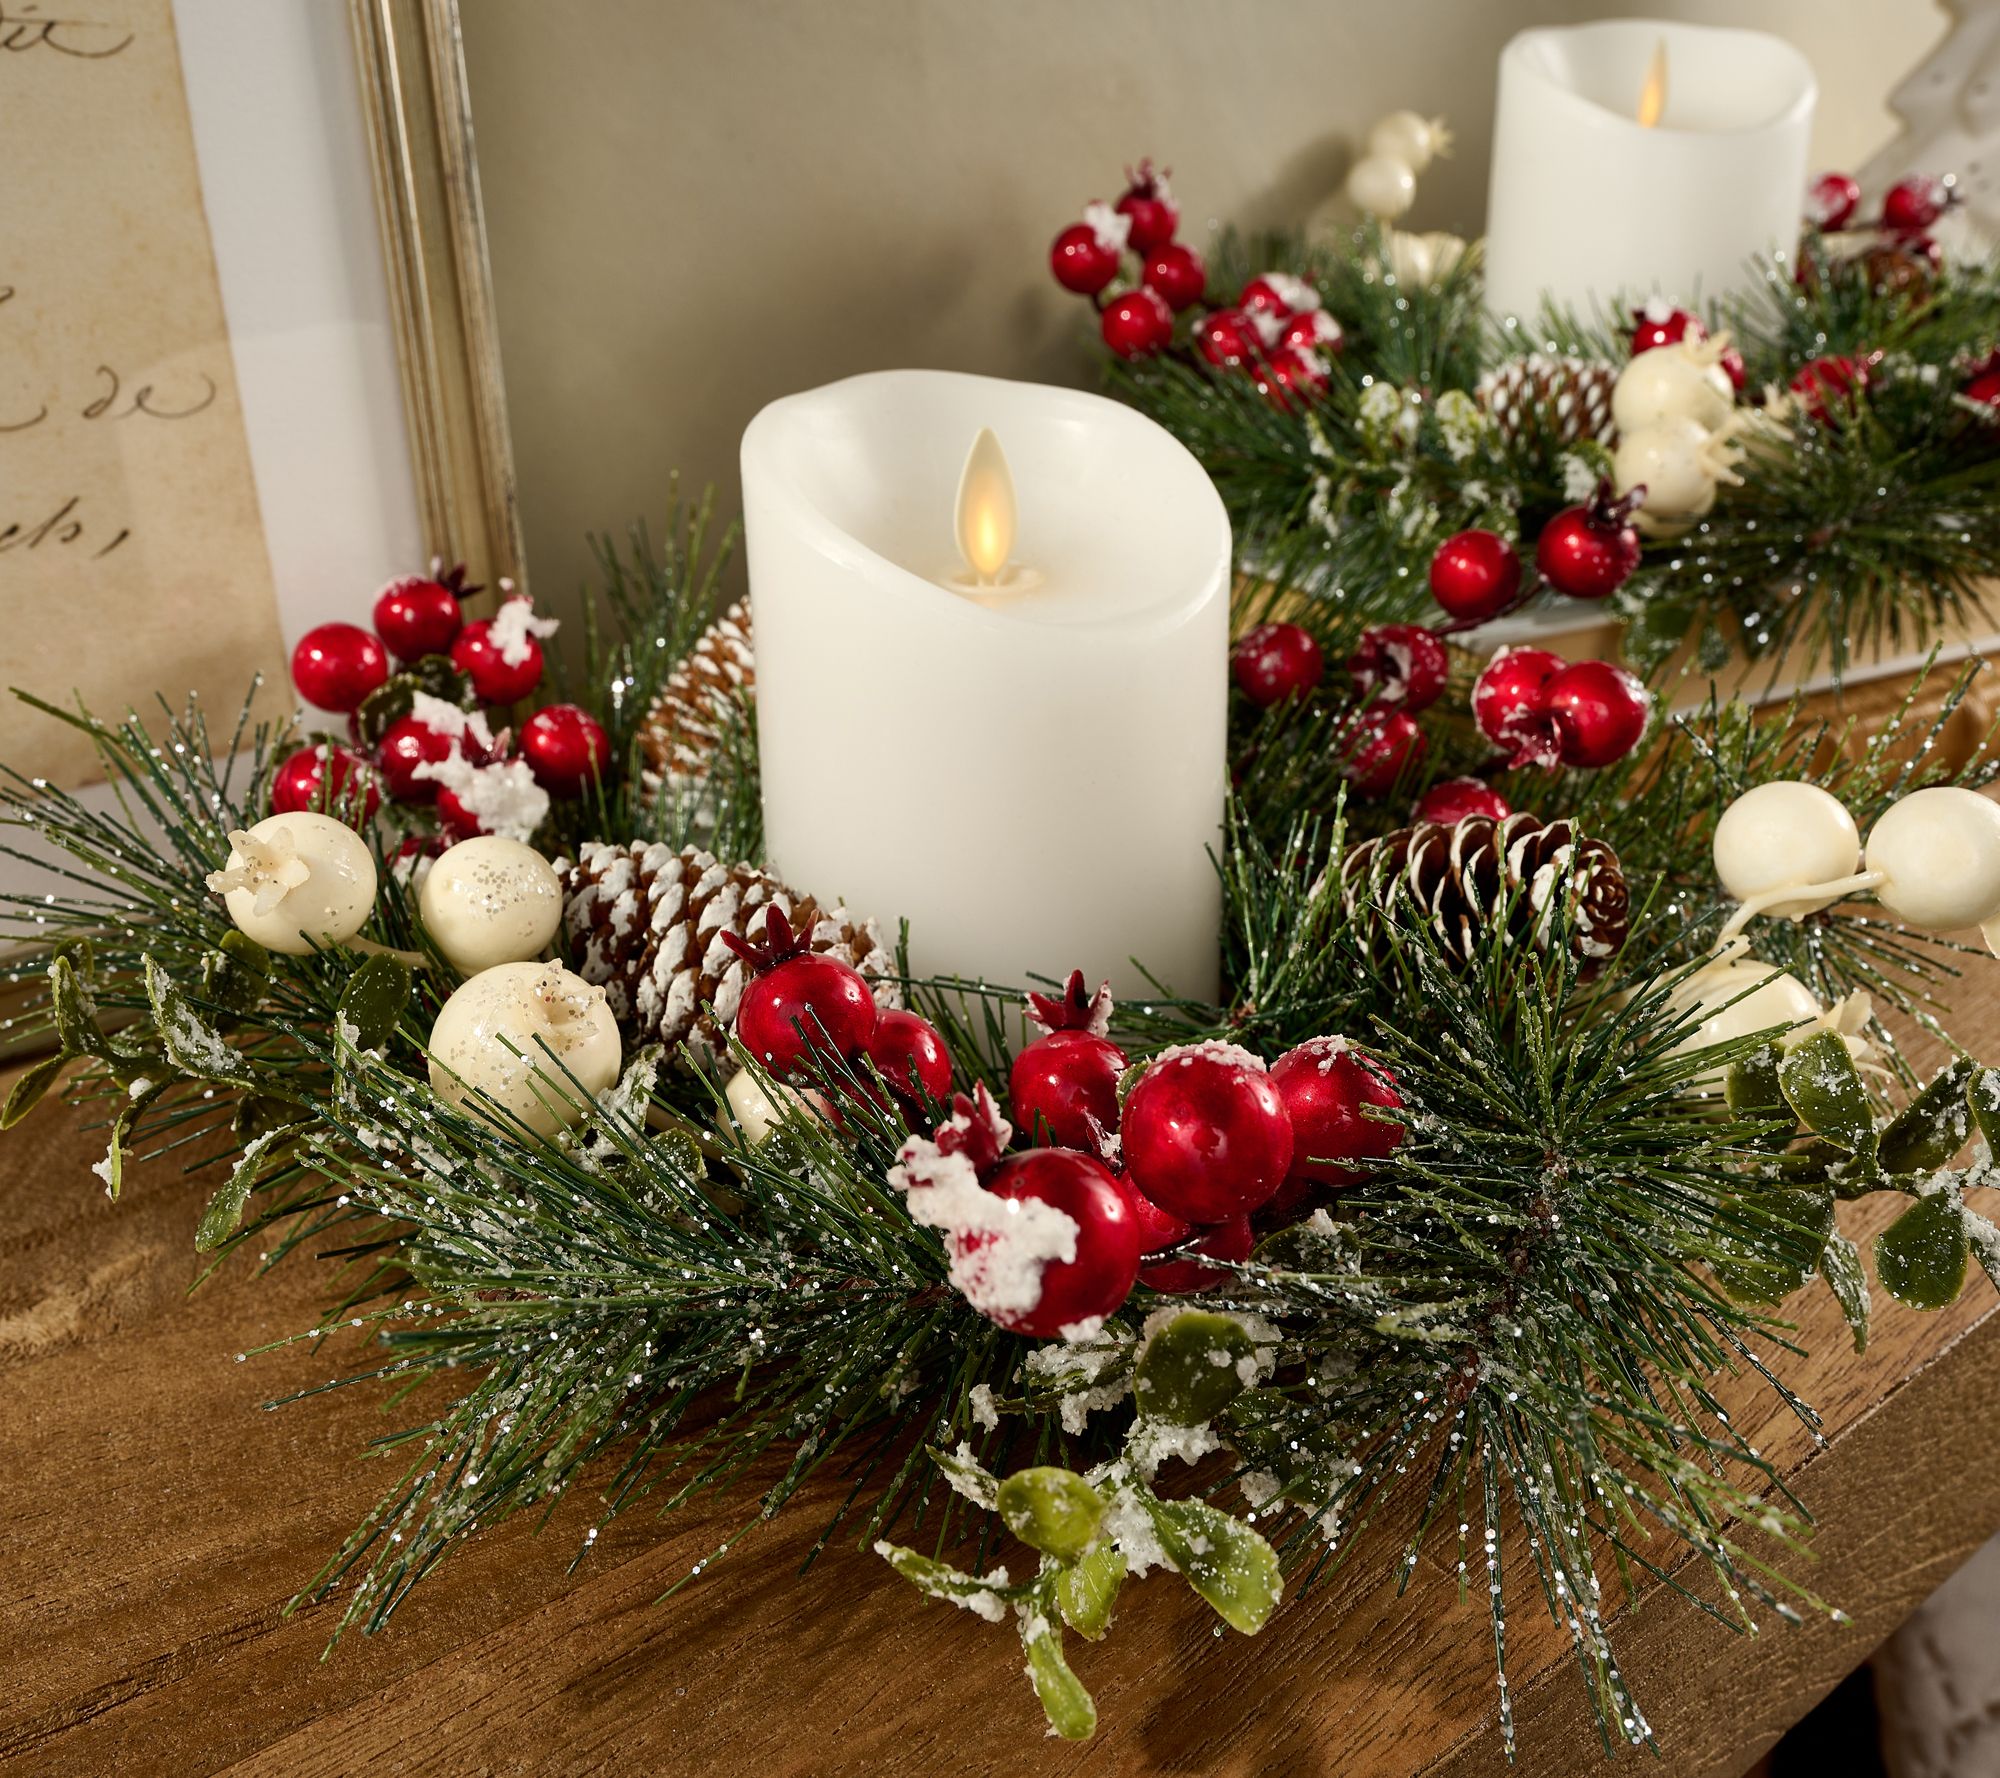 Create Festive Frosted Candle Holders in 2 Easy Steps